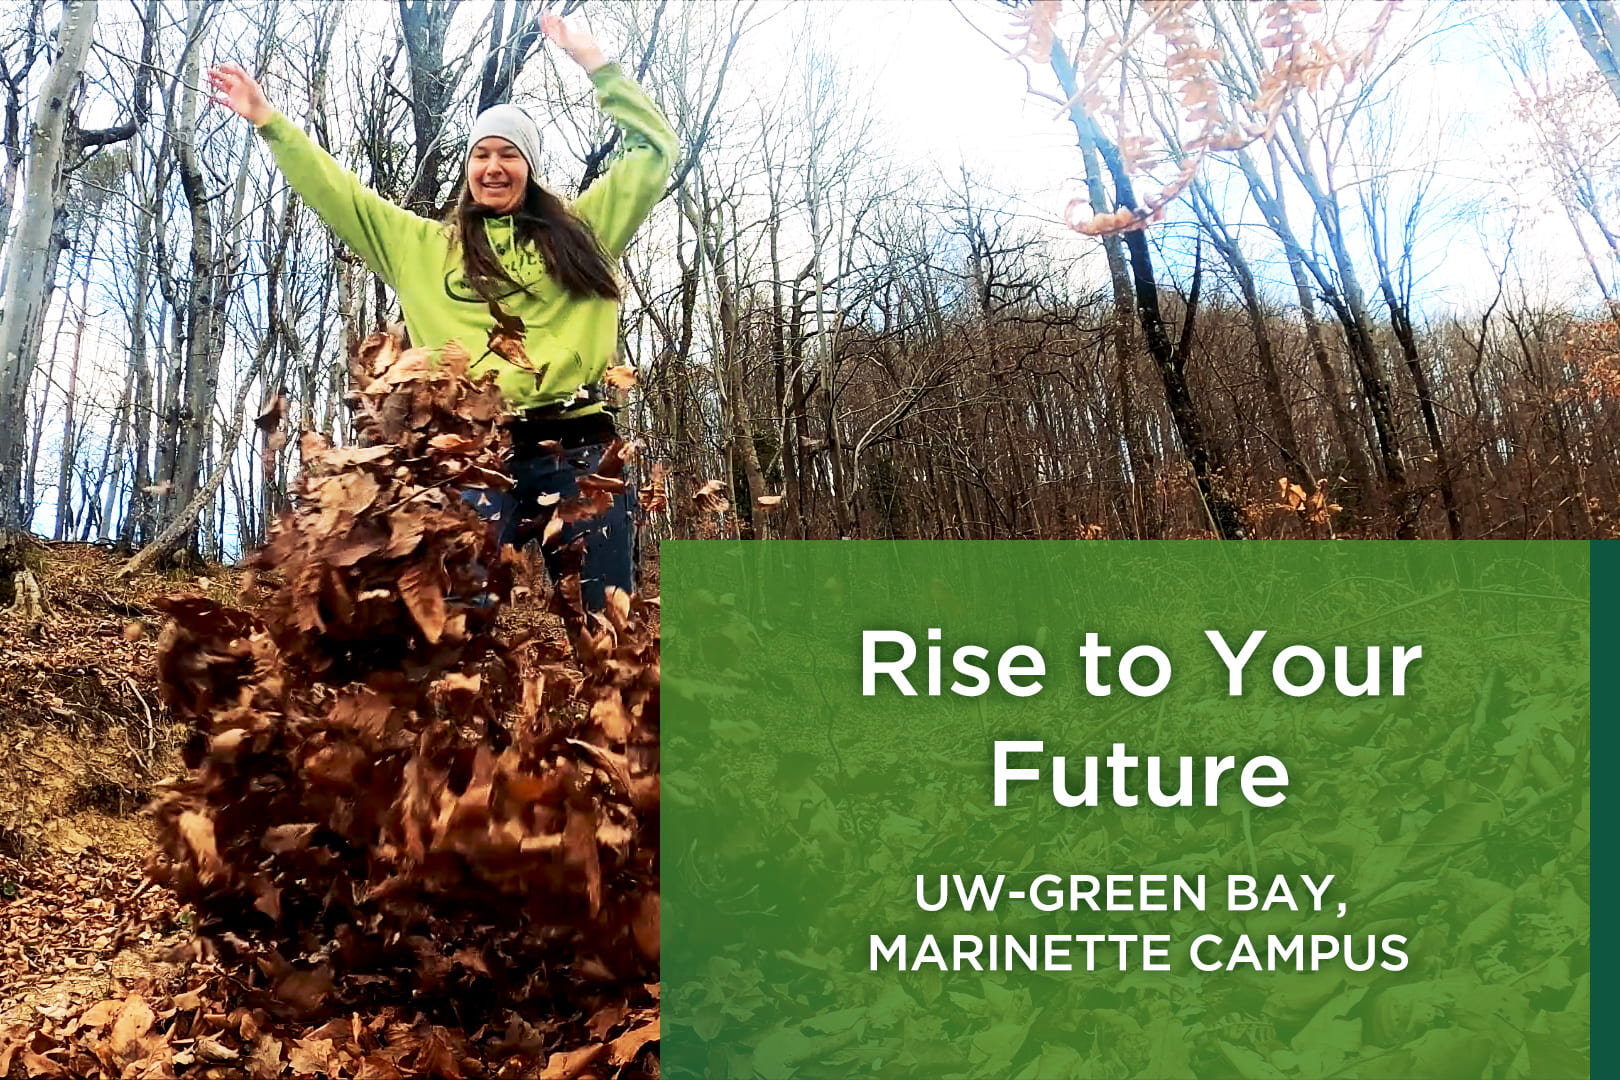 Photo of college student running through fallen leaves with her arms raised up over her head. She is laughing and smiling.